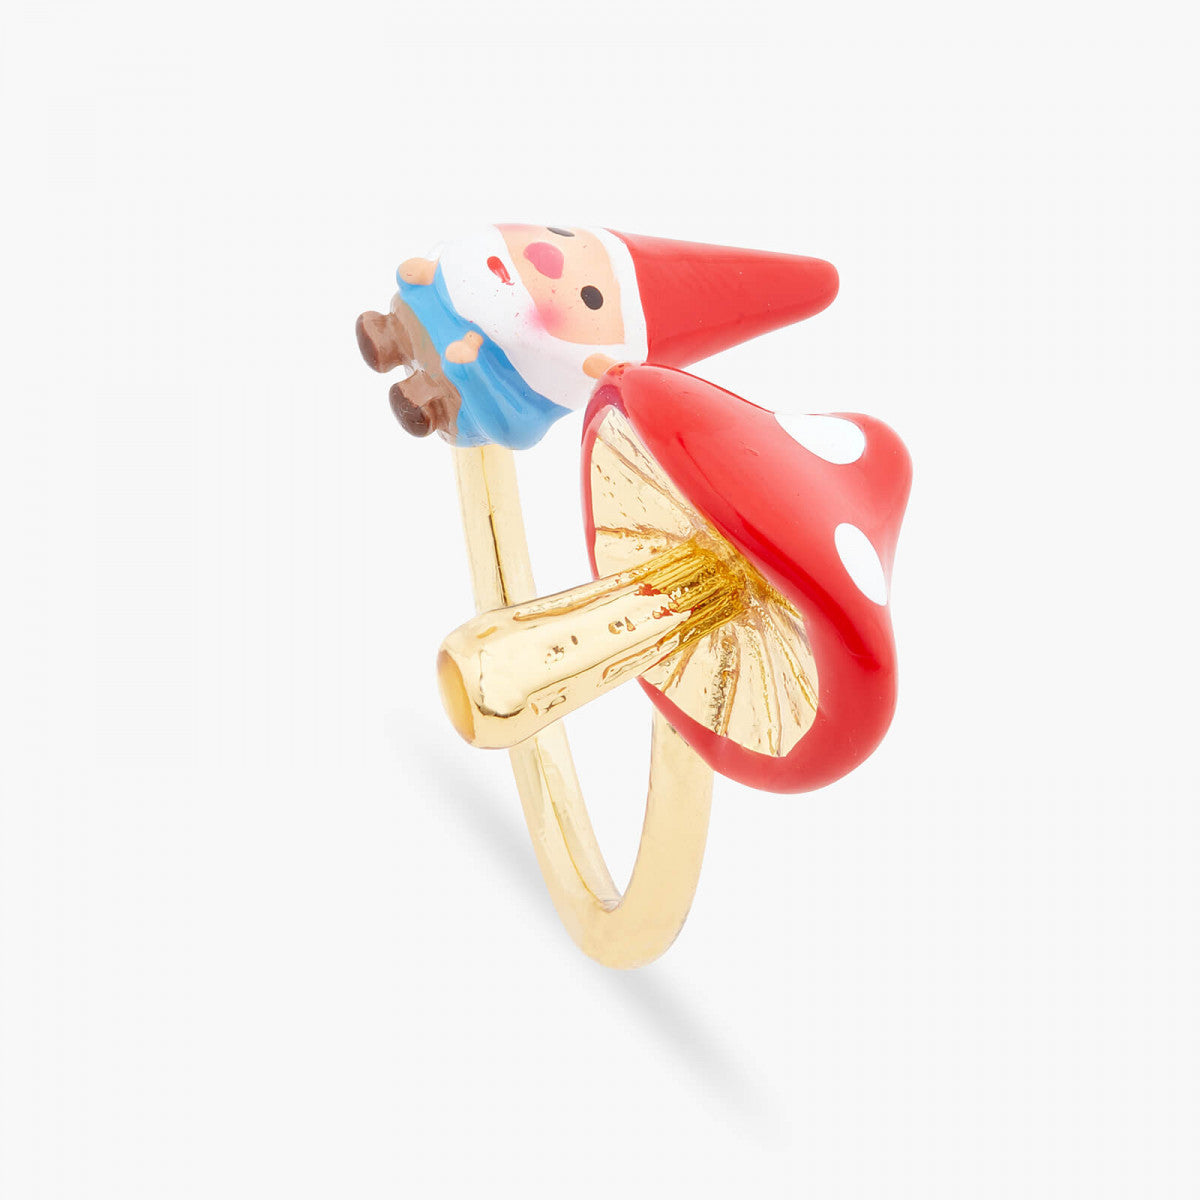 GARDEN GNOME AND MUSHROOM YOU AND ME ADJUSTABLE RING